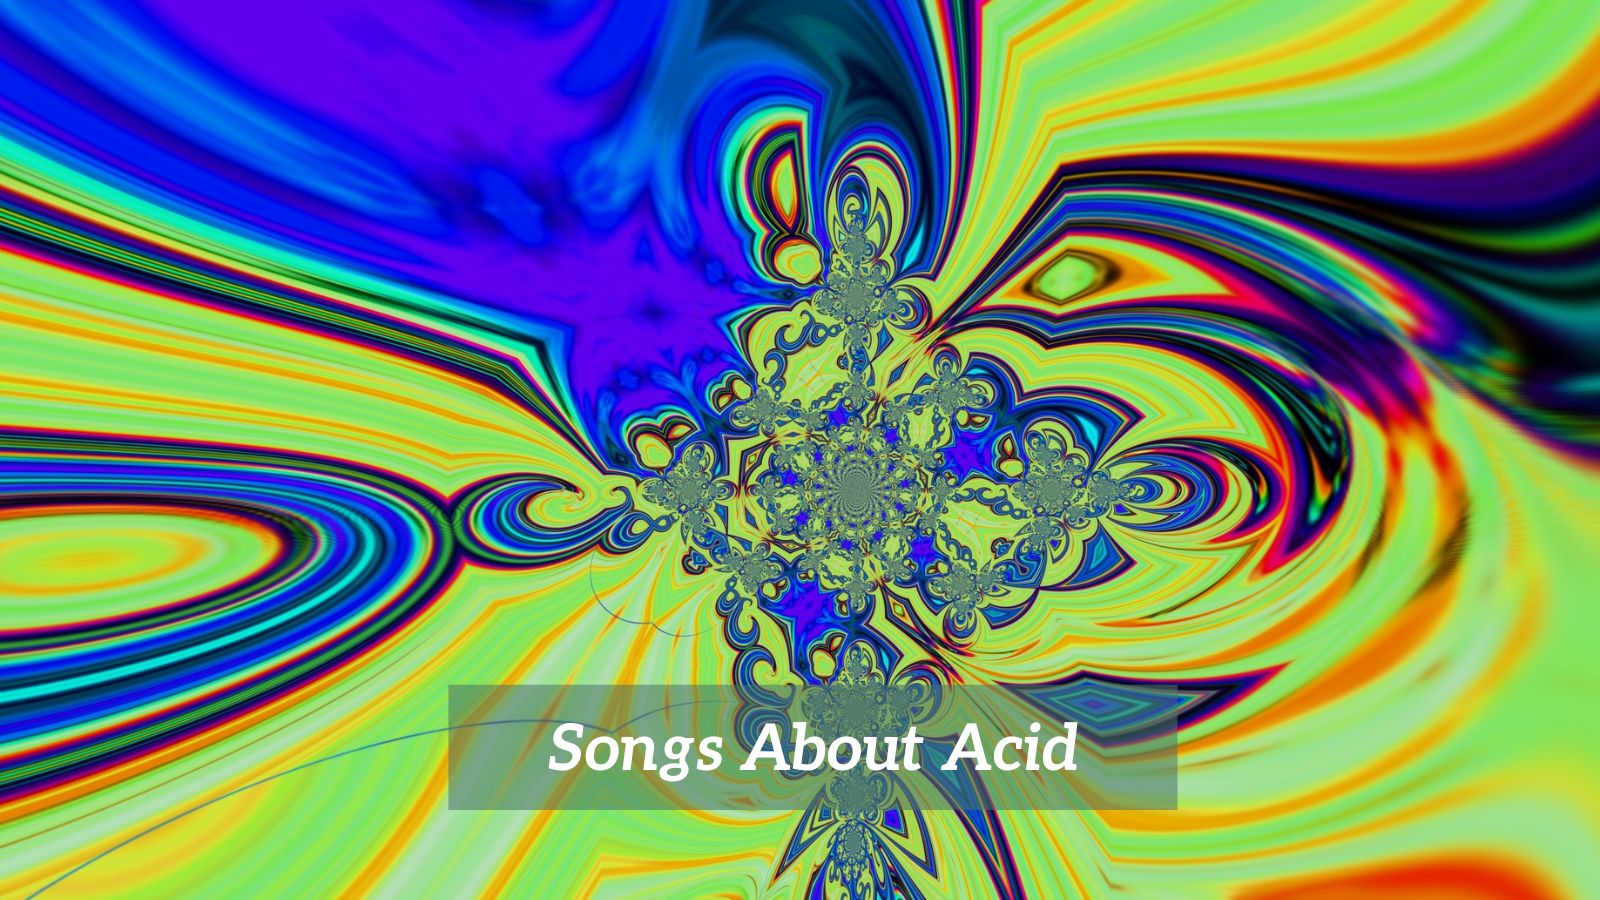 Songs About Acid